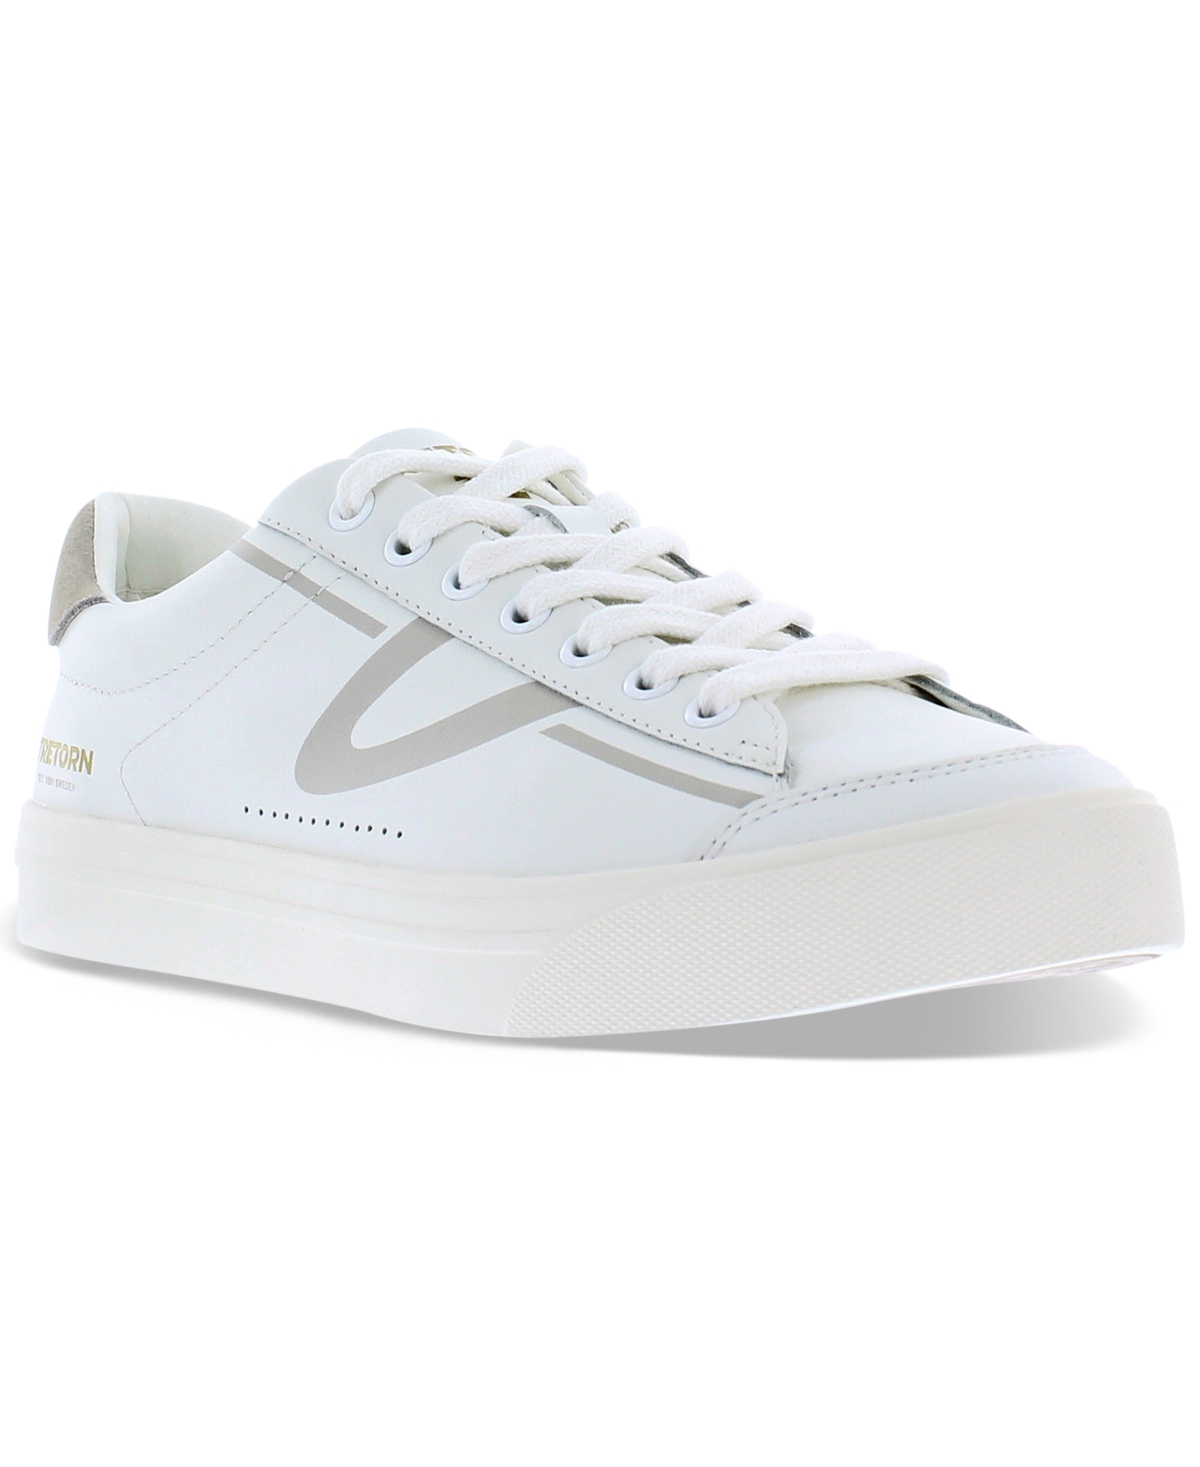 Women's Hopper Casual Sneakers from Finish Line - White, Taupe